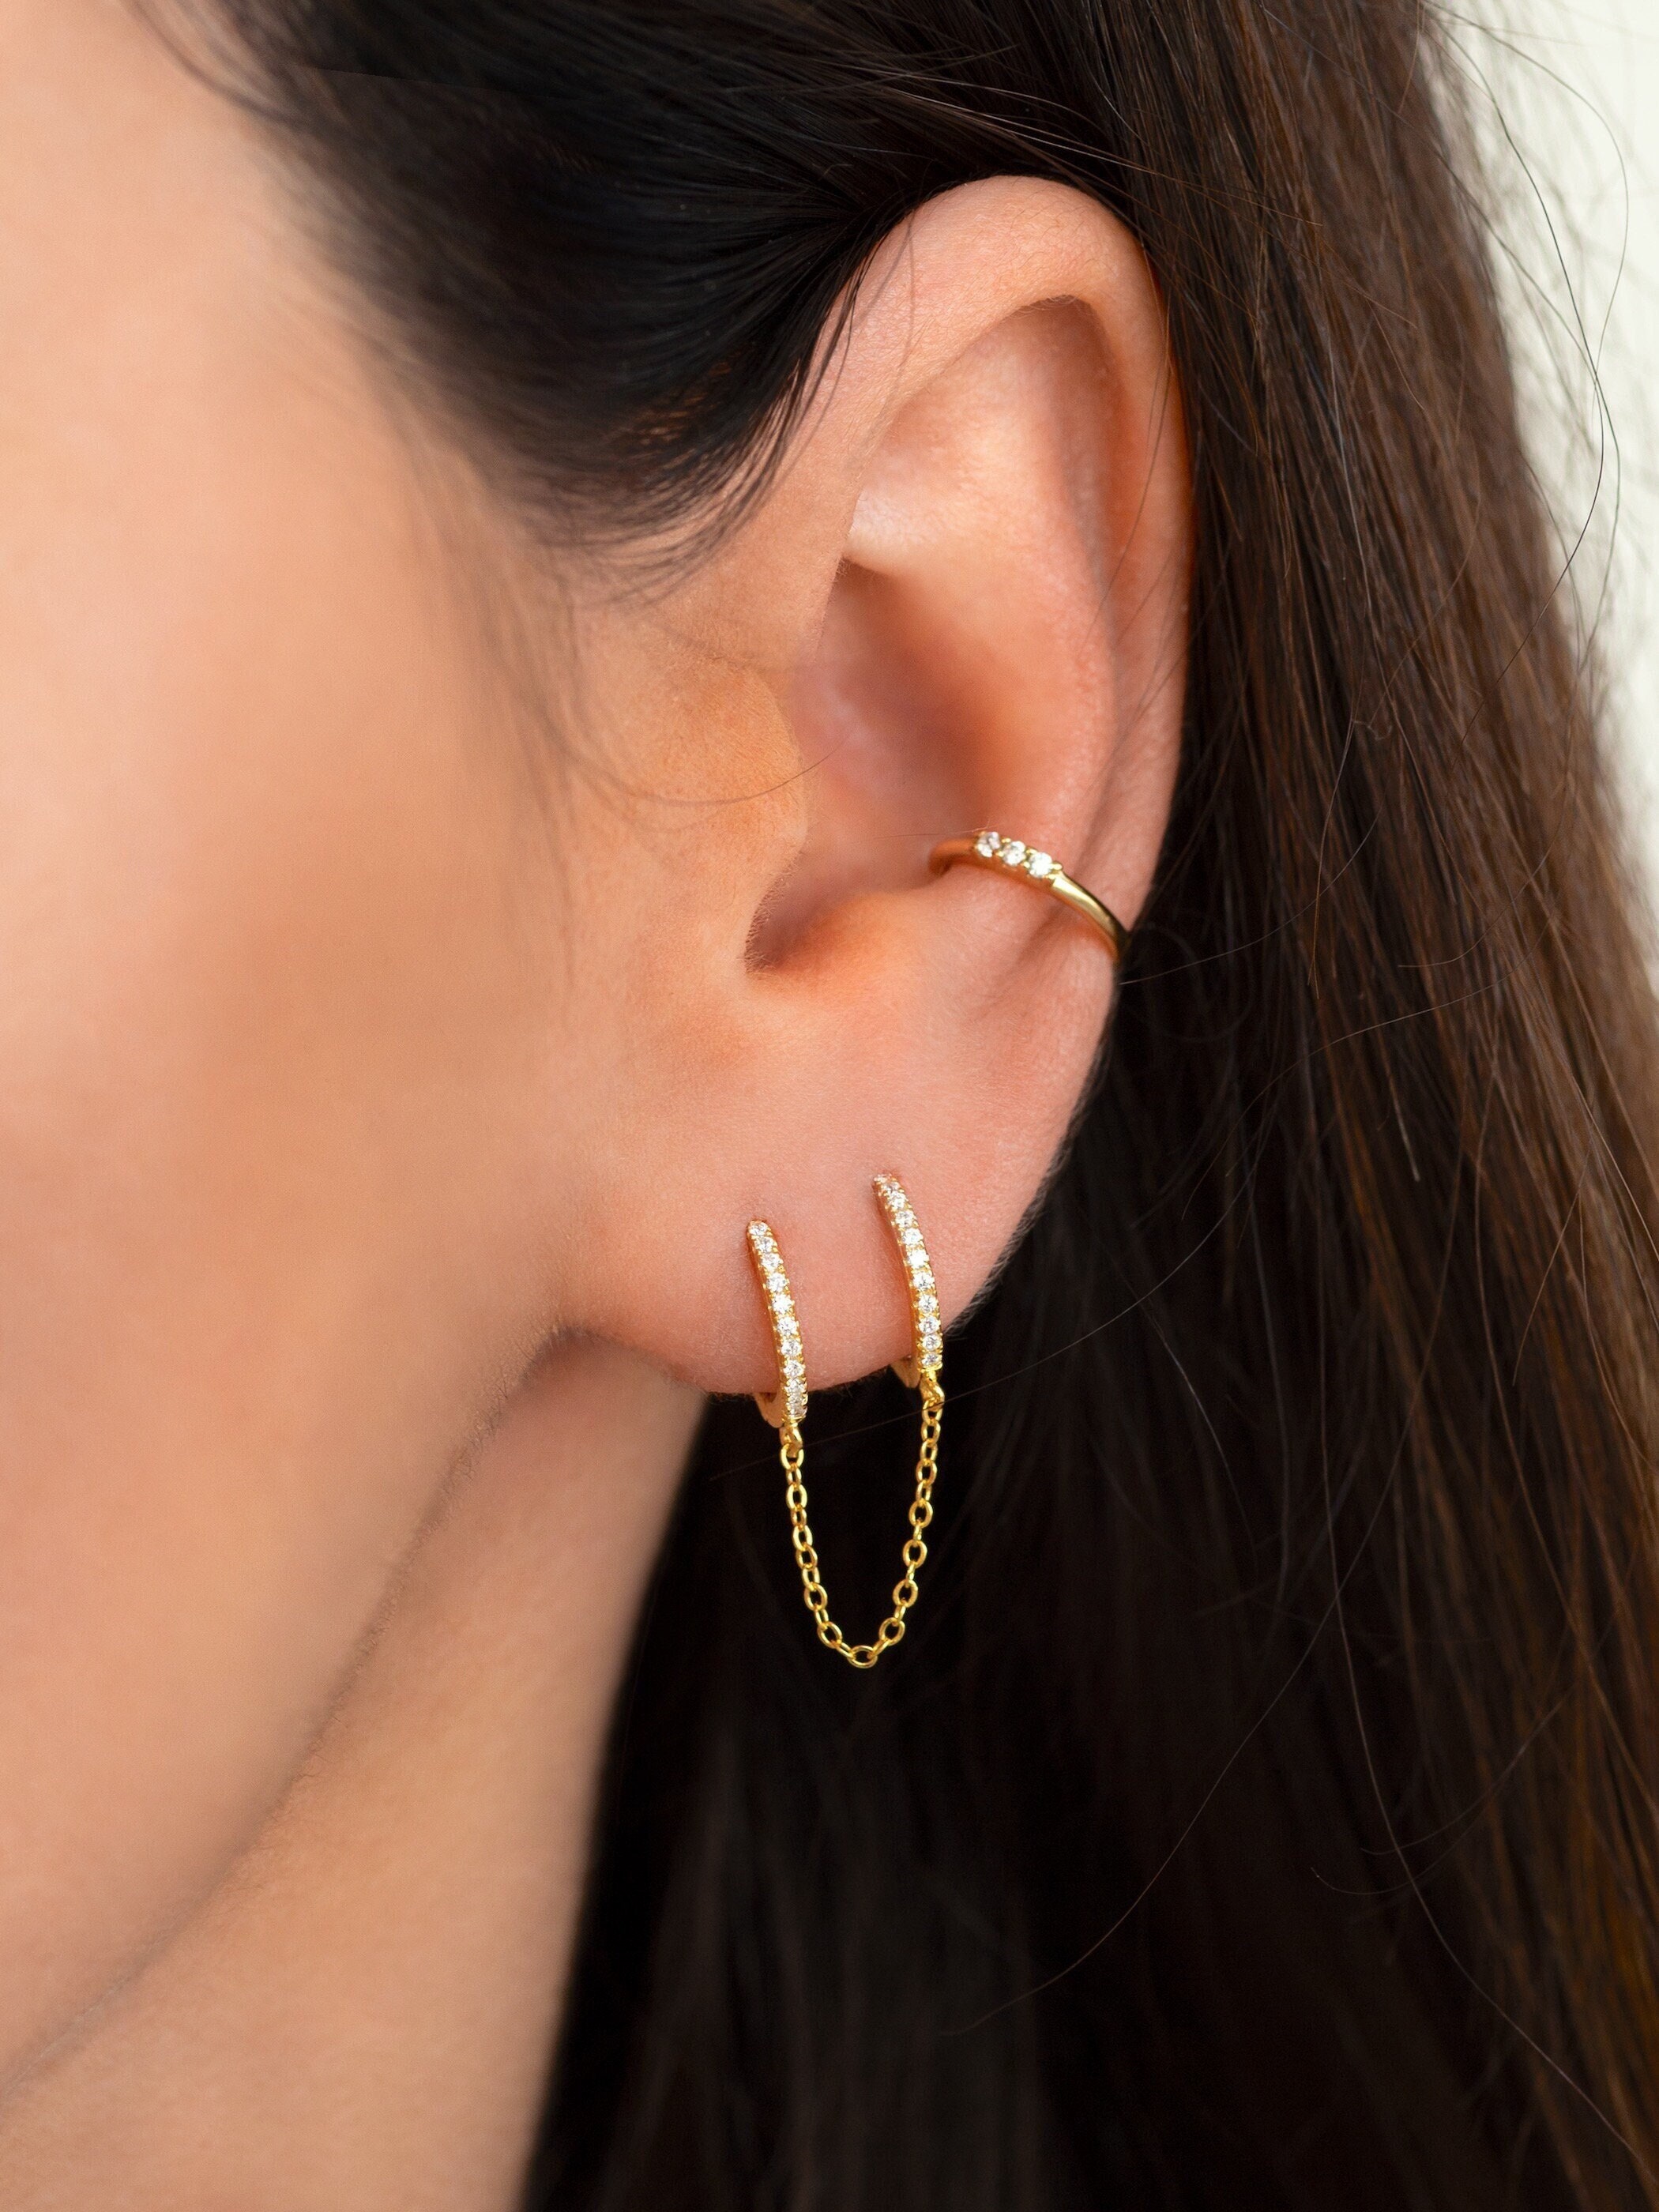 Ear Cuff with Hoops Attached for A Double Pierced Look .925 Sterling Silver Small Hoop Earrings Gold